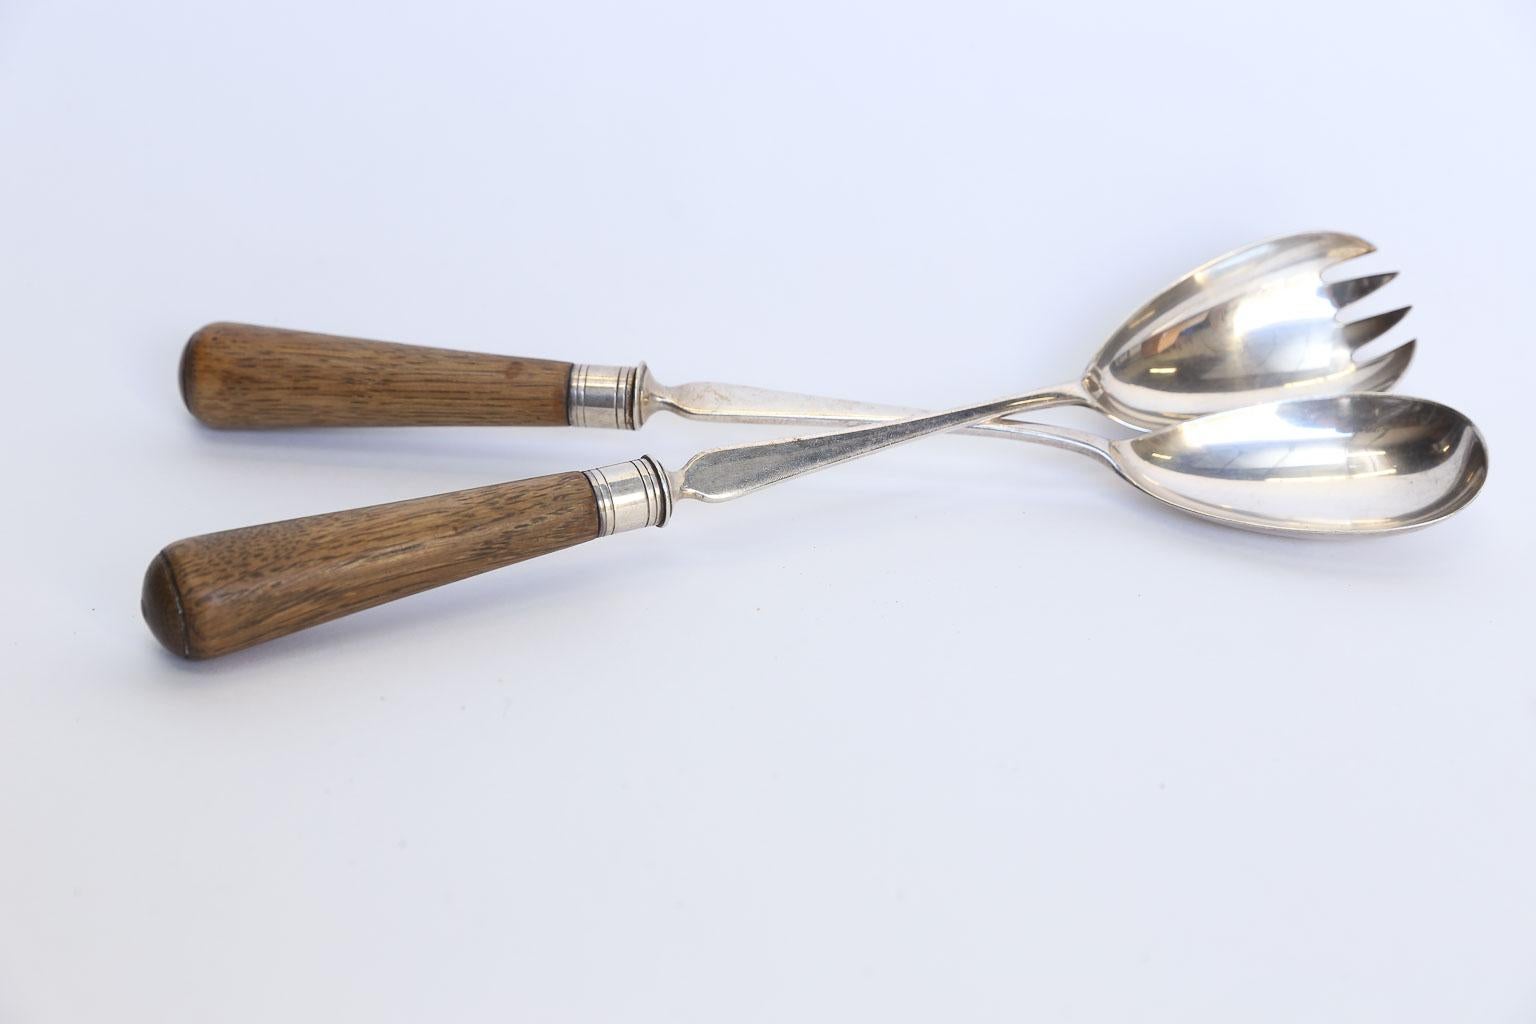 Lovely pair of English salad servers made in traditional oak and silver plate. These will surely add vintage English charm to your table. Measurements below are for each individual piece.